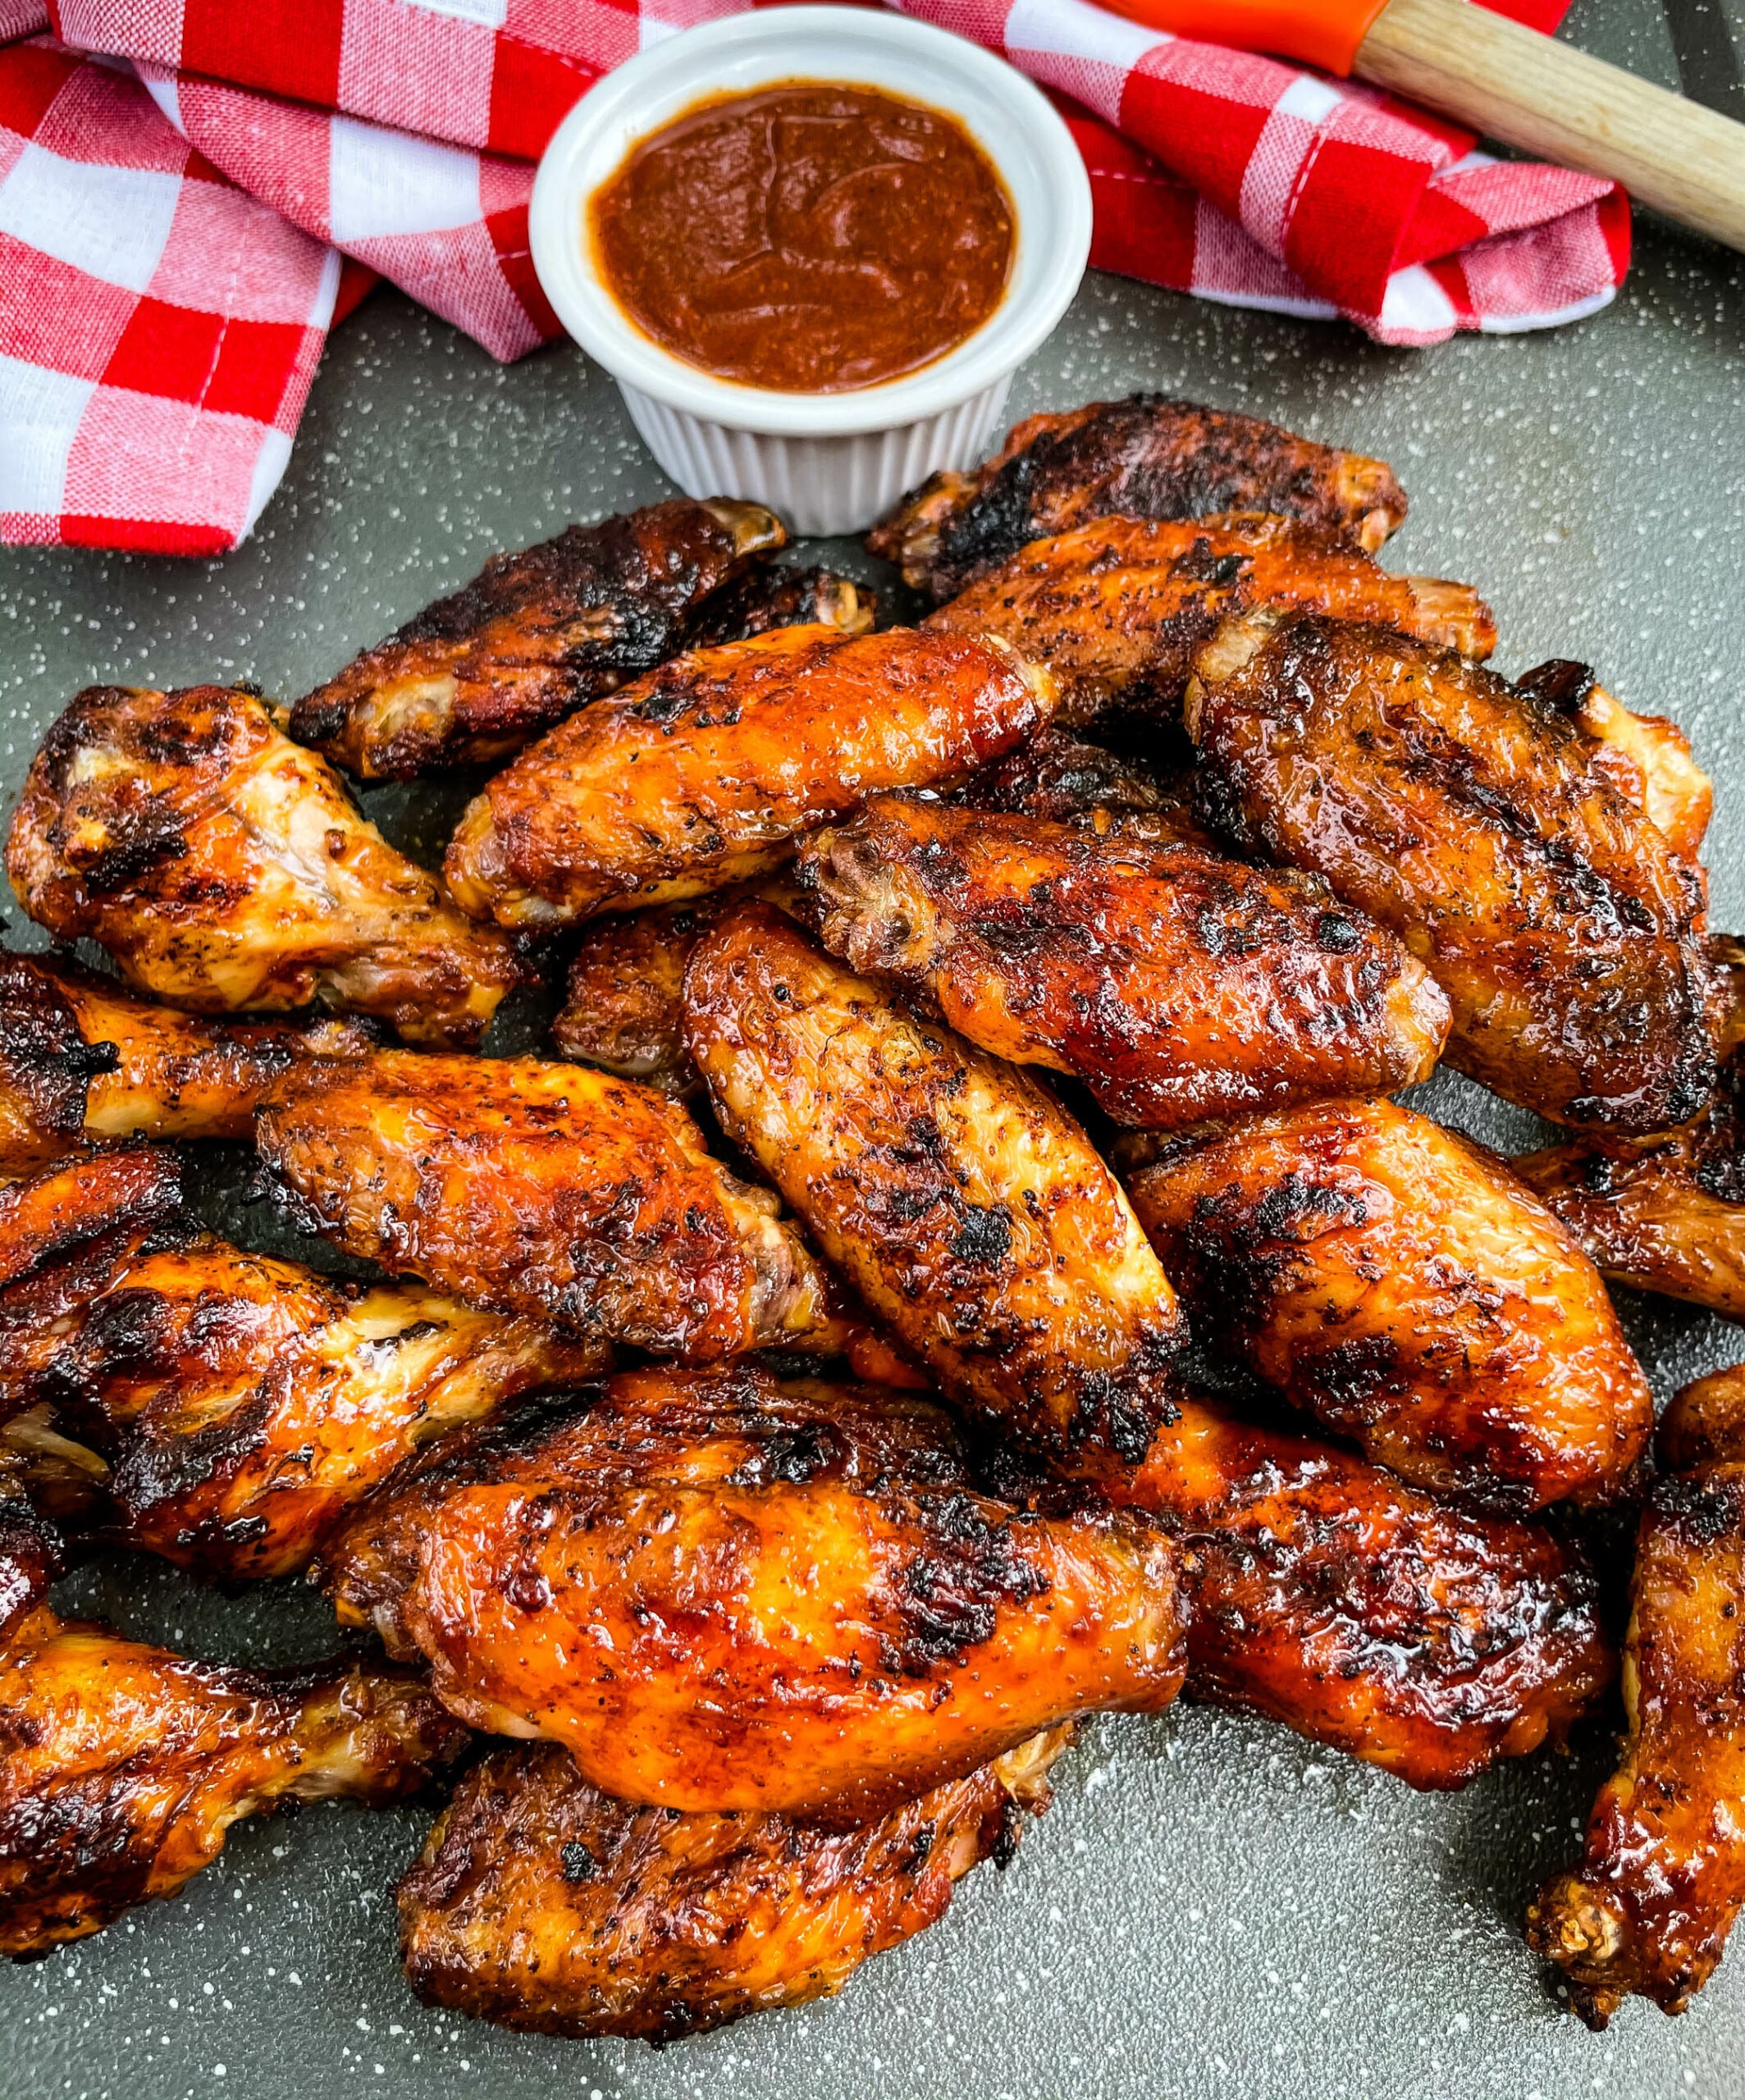 How To Grill Chicken Wings On Charcoal Grill-2023